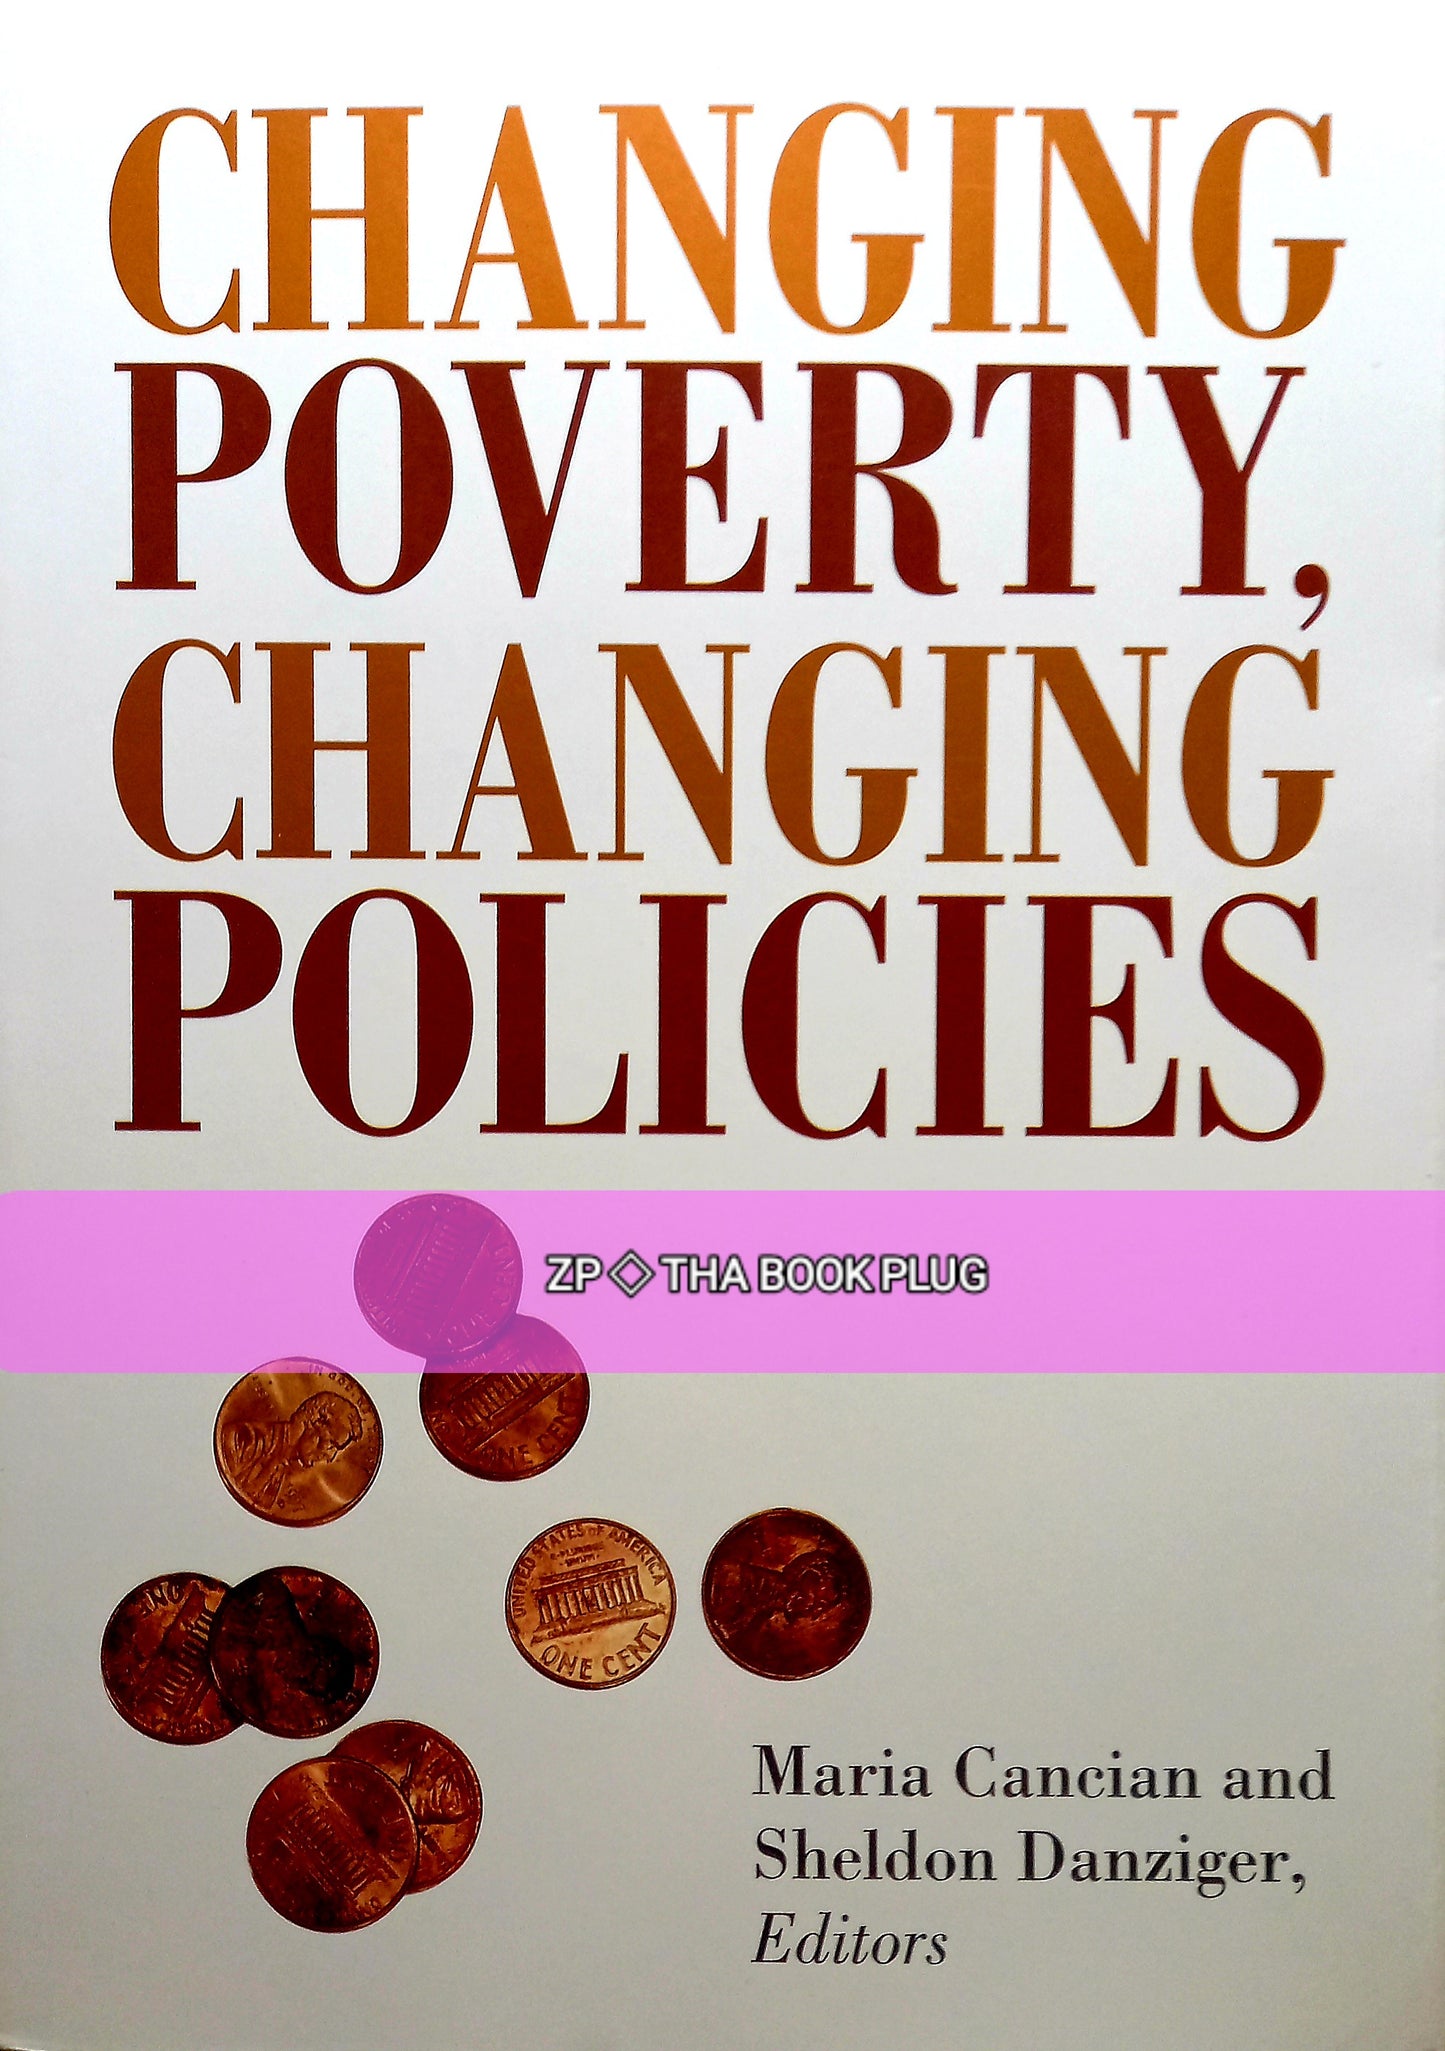 Changing Poverty, Changing Policies